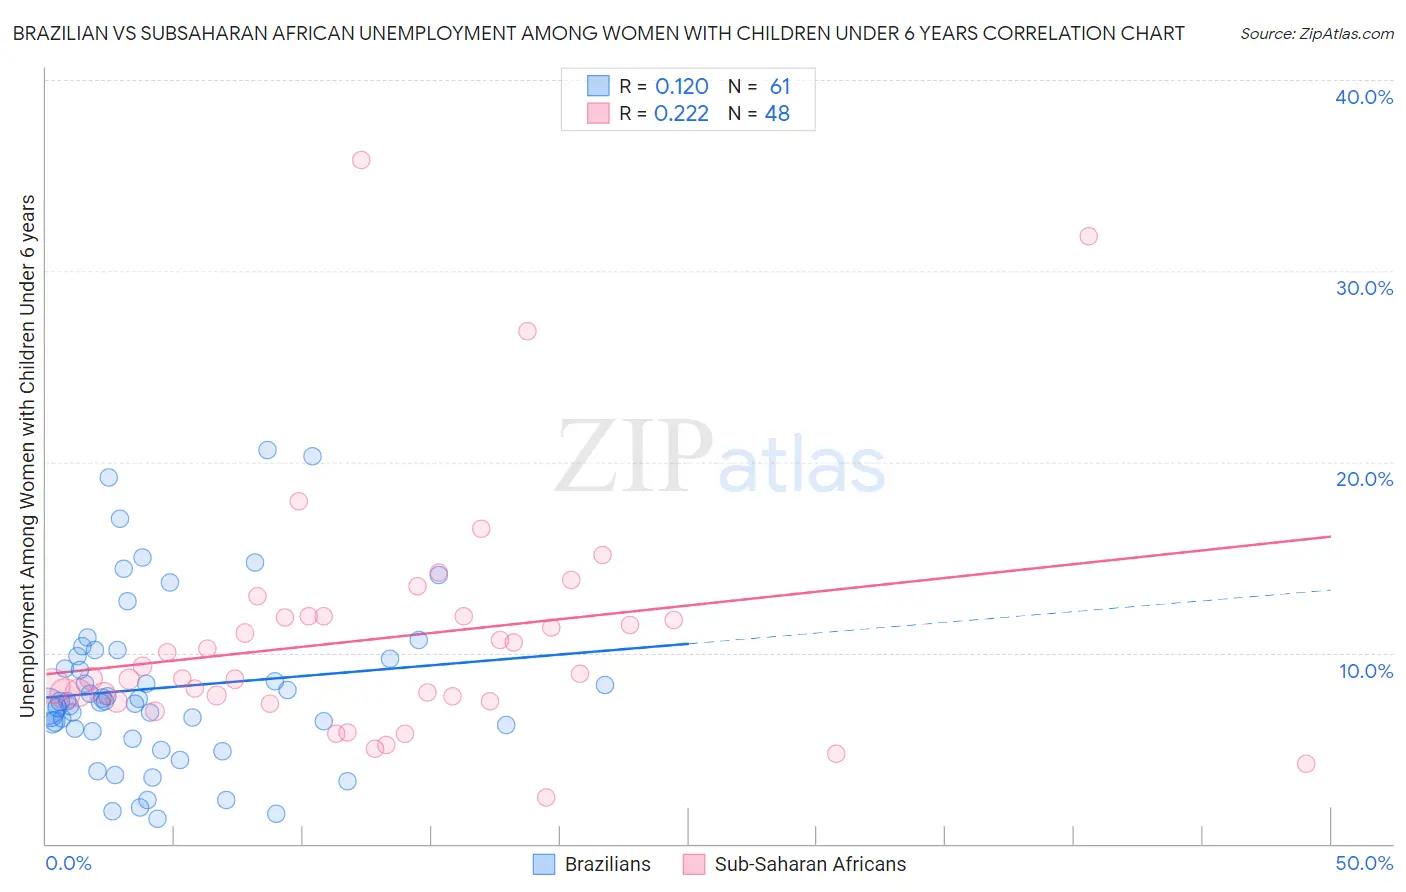 Brazilian vs Subsaharan African Unemployment Among Women with Children Under 6 years